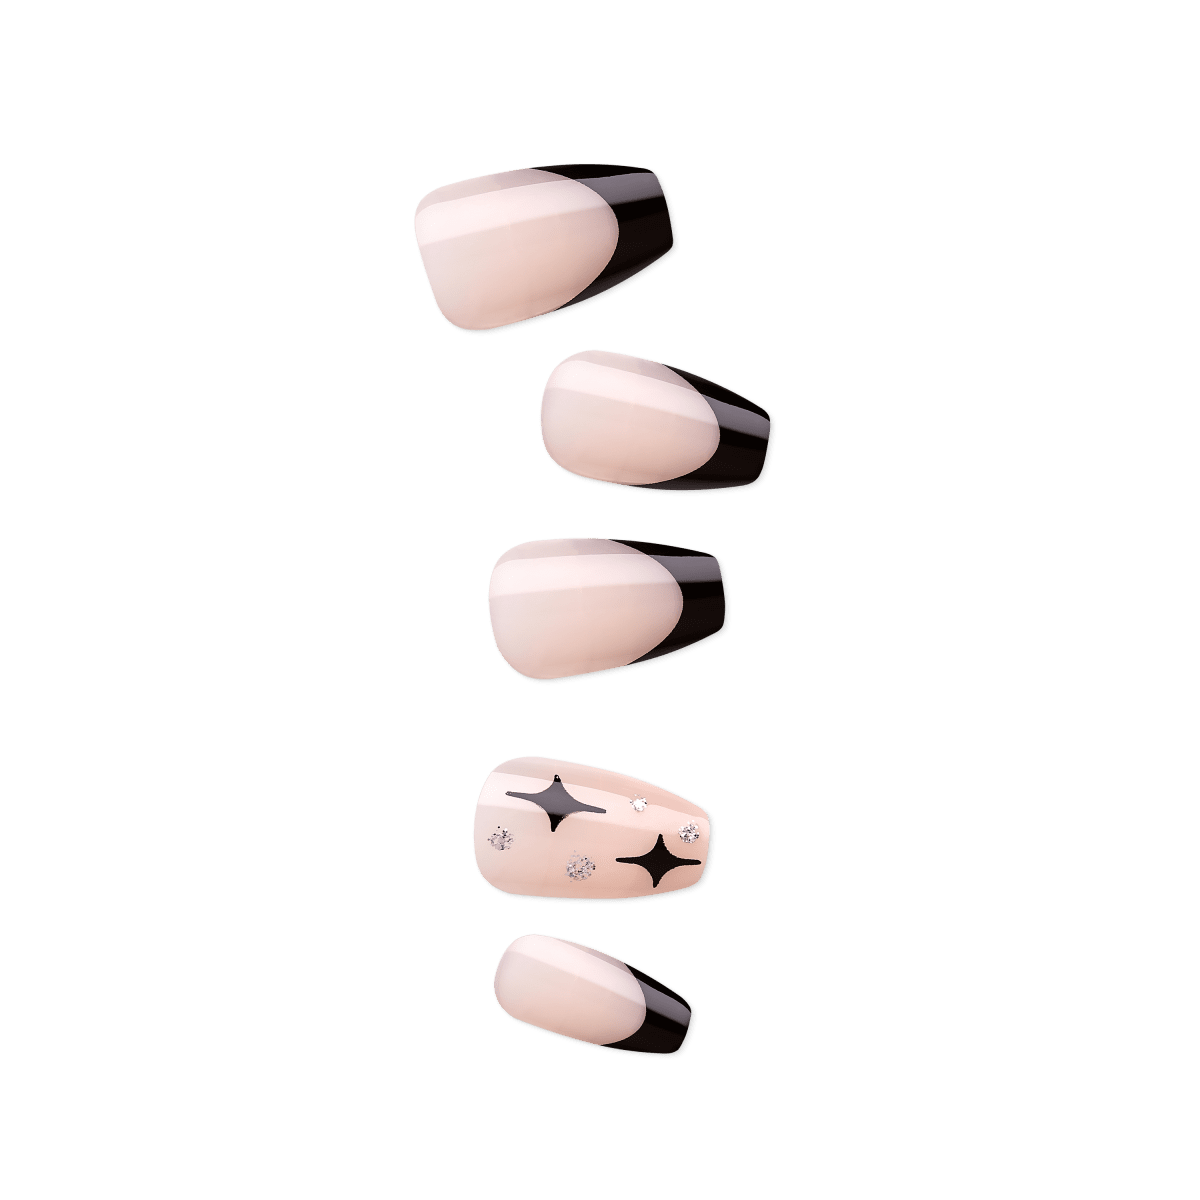 imPRESS Design Press-On Nails - For the Night